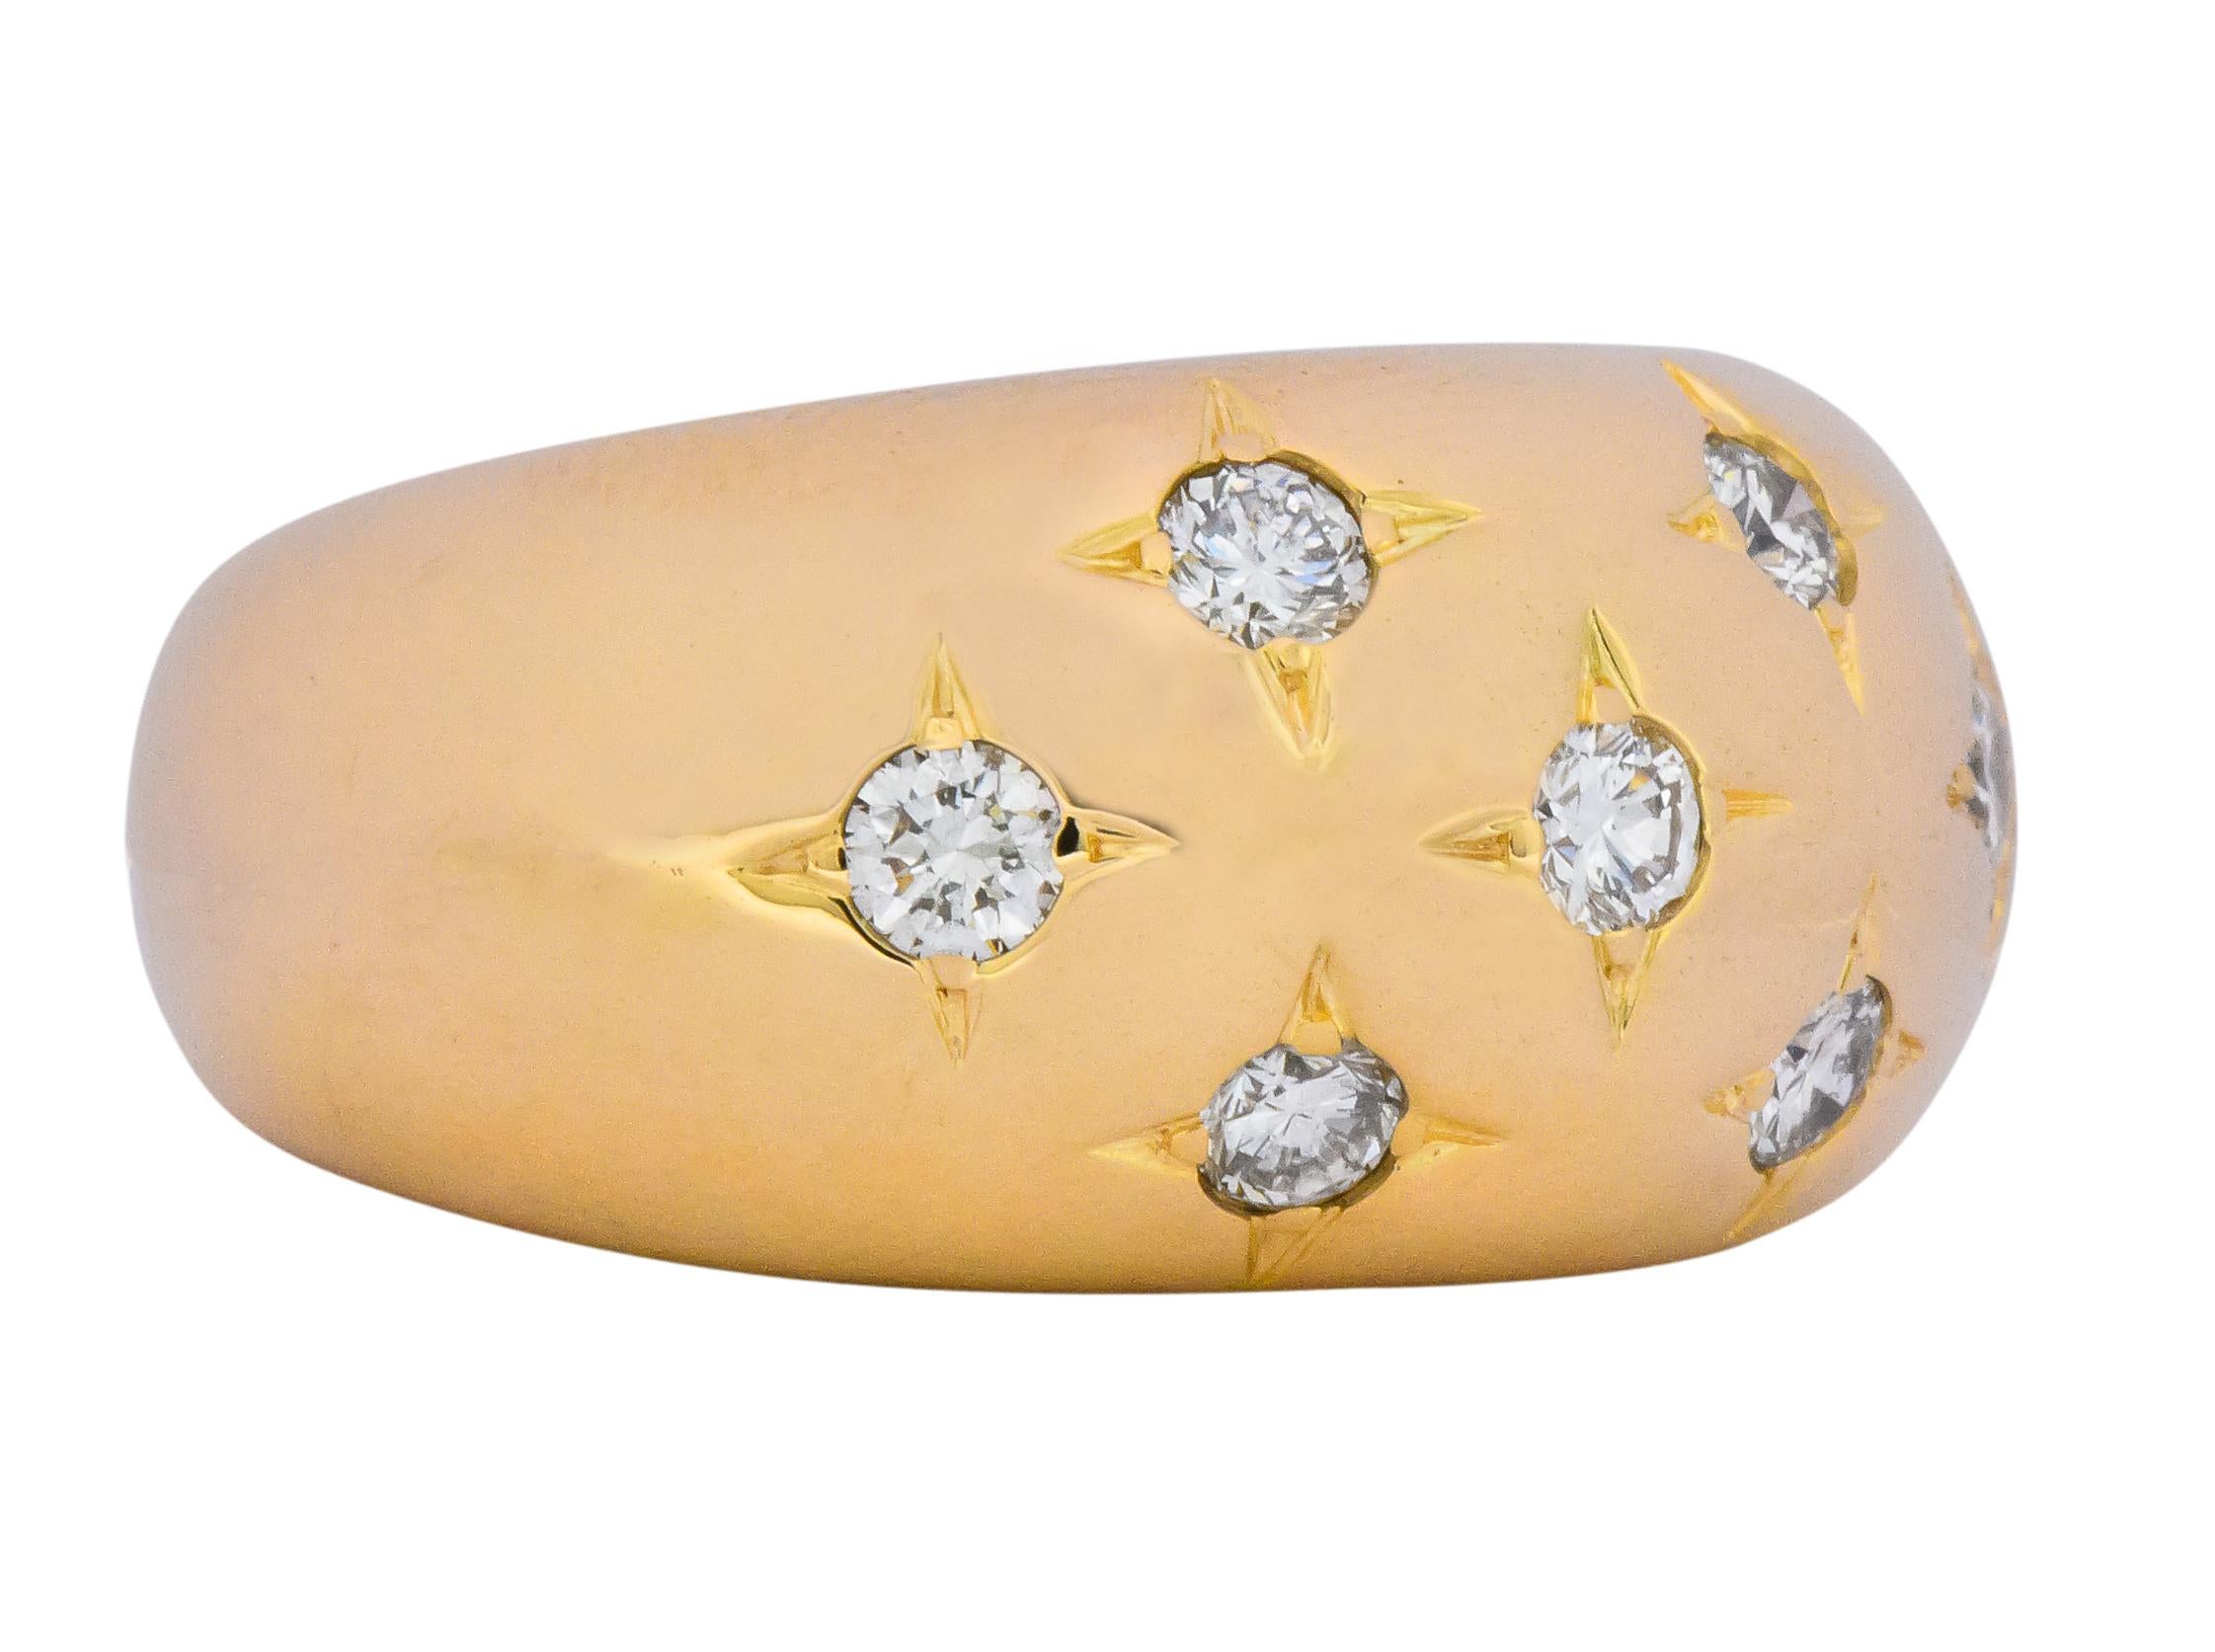 High polished gold, bombay style ring

With seven graver set round brilliant cut diamonds weighing approximately 0.45 carat, H/I color and VS clarity

Numbered and fully signed Chaumet Paris

Stamped with marker's mark and 750 for 18 karat